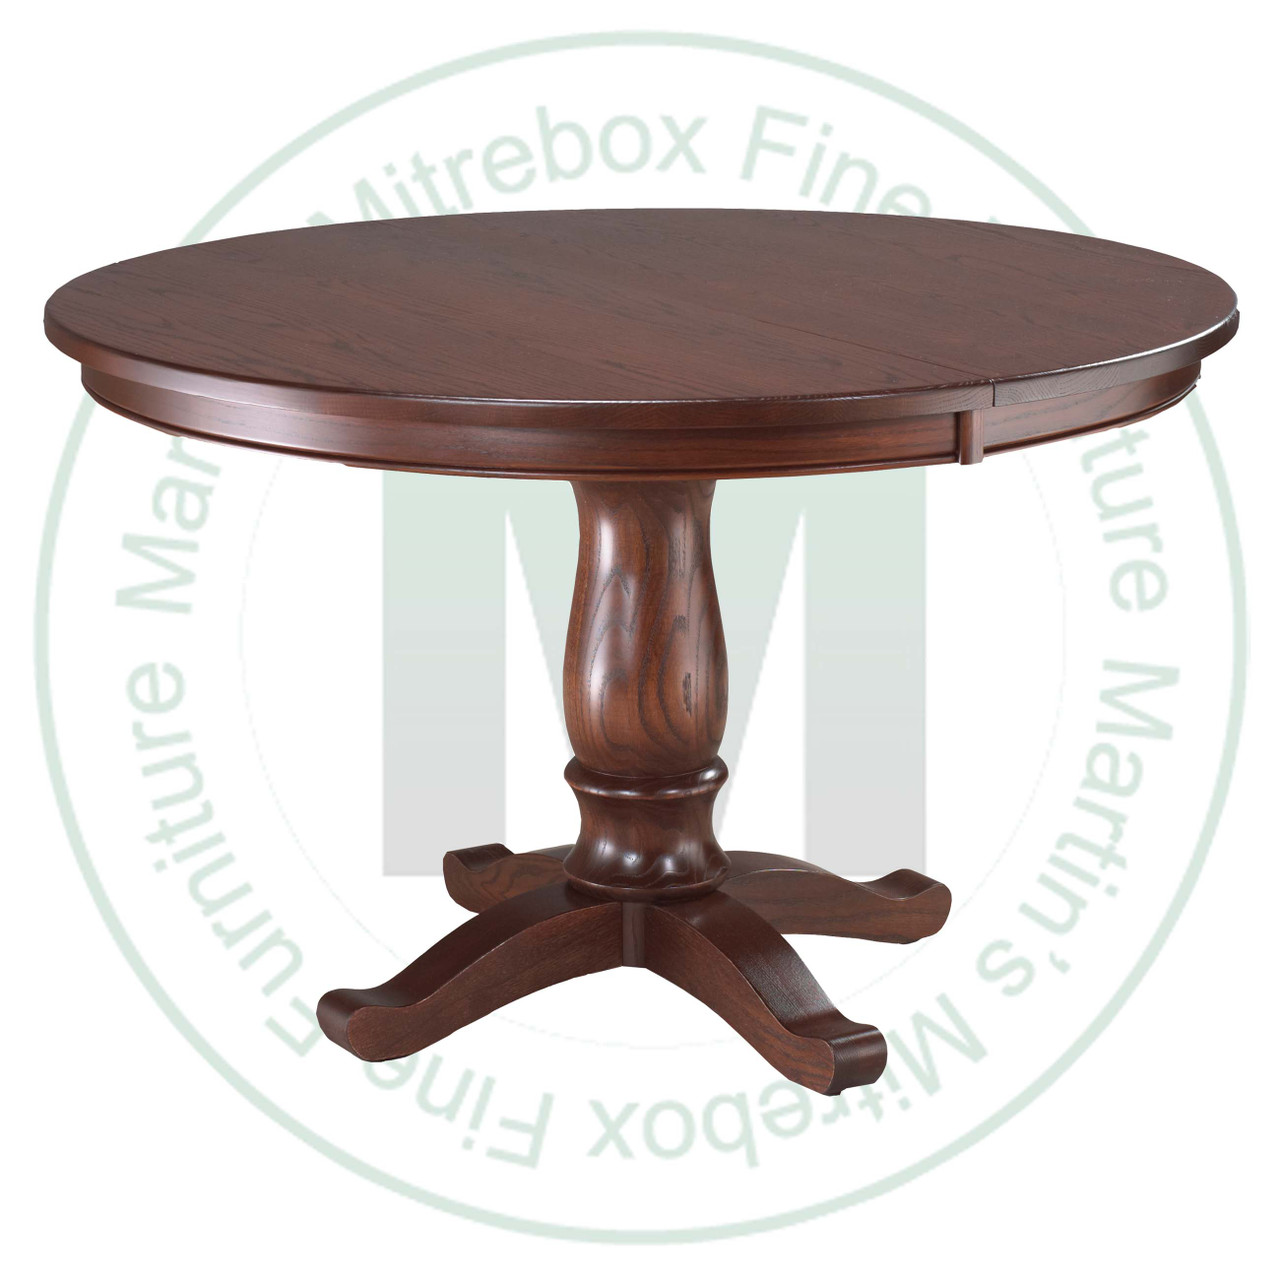 Wormy Maple Kimberly Crest Single Pedestal Table 36''D x 54''W x 30''H Round Solid Table. Table Has 1'' Thick Top.